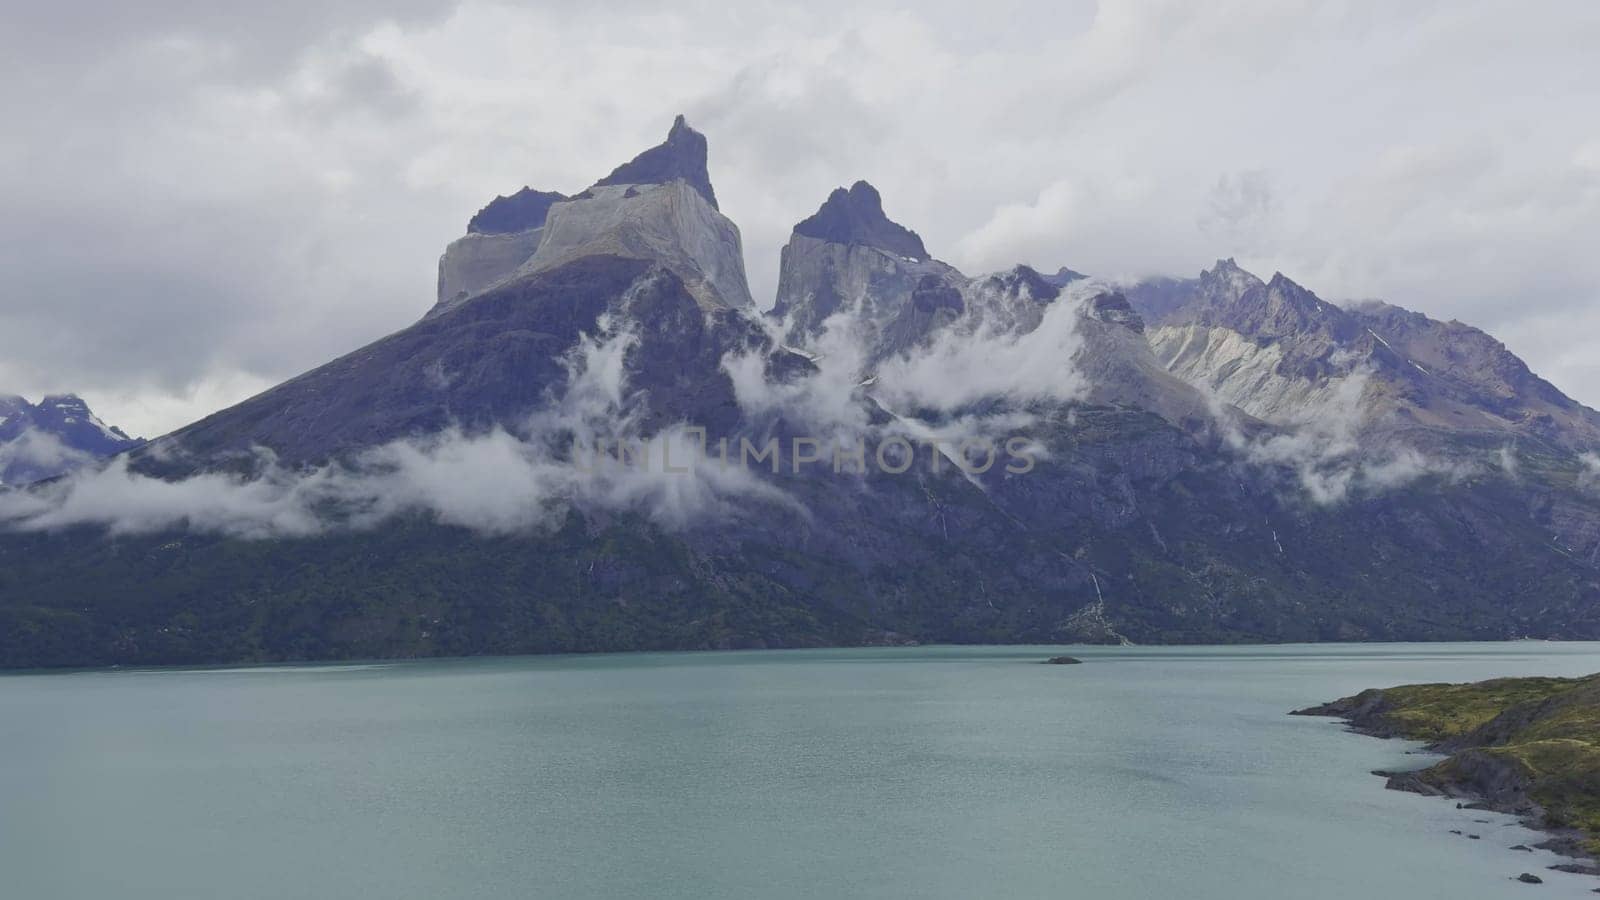 Time-lapse of clouds over a lake with Cuernos del Paine mountain in the background.